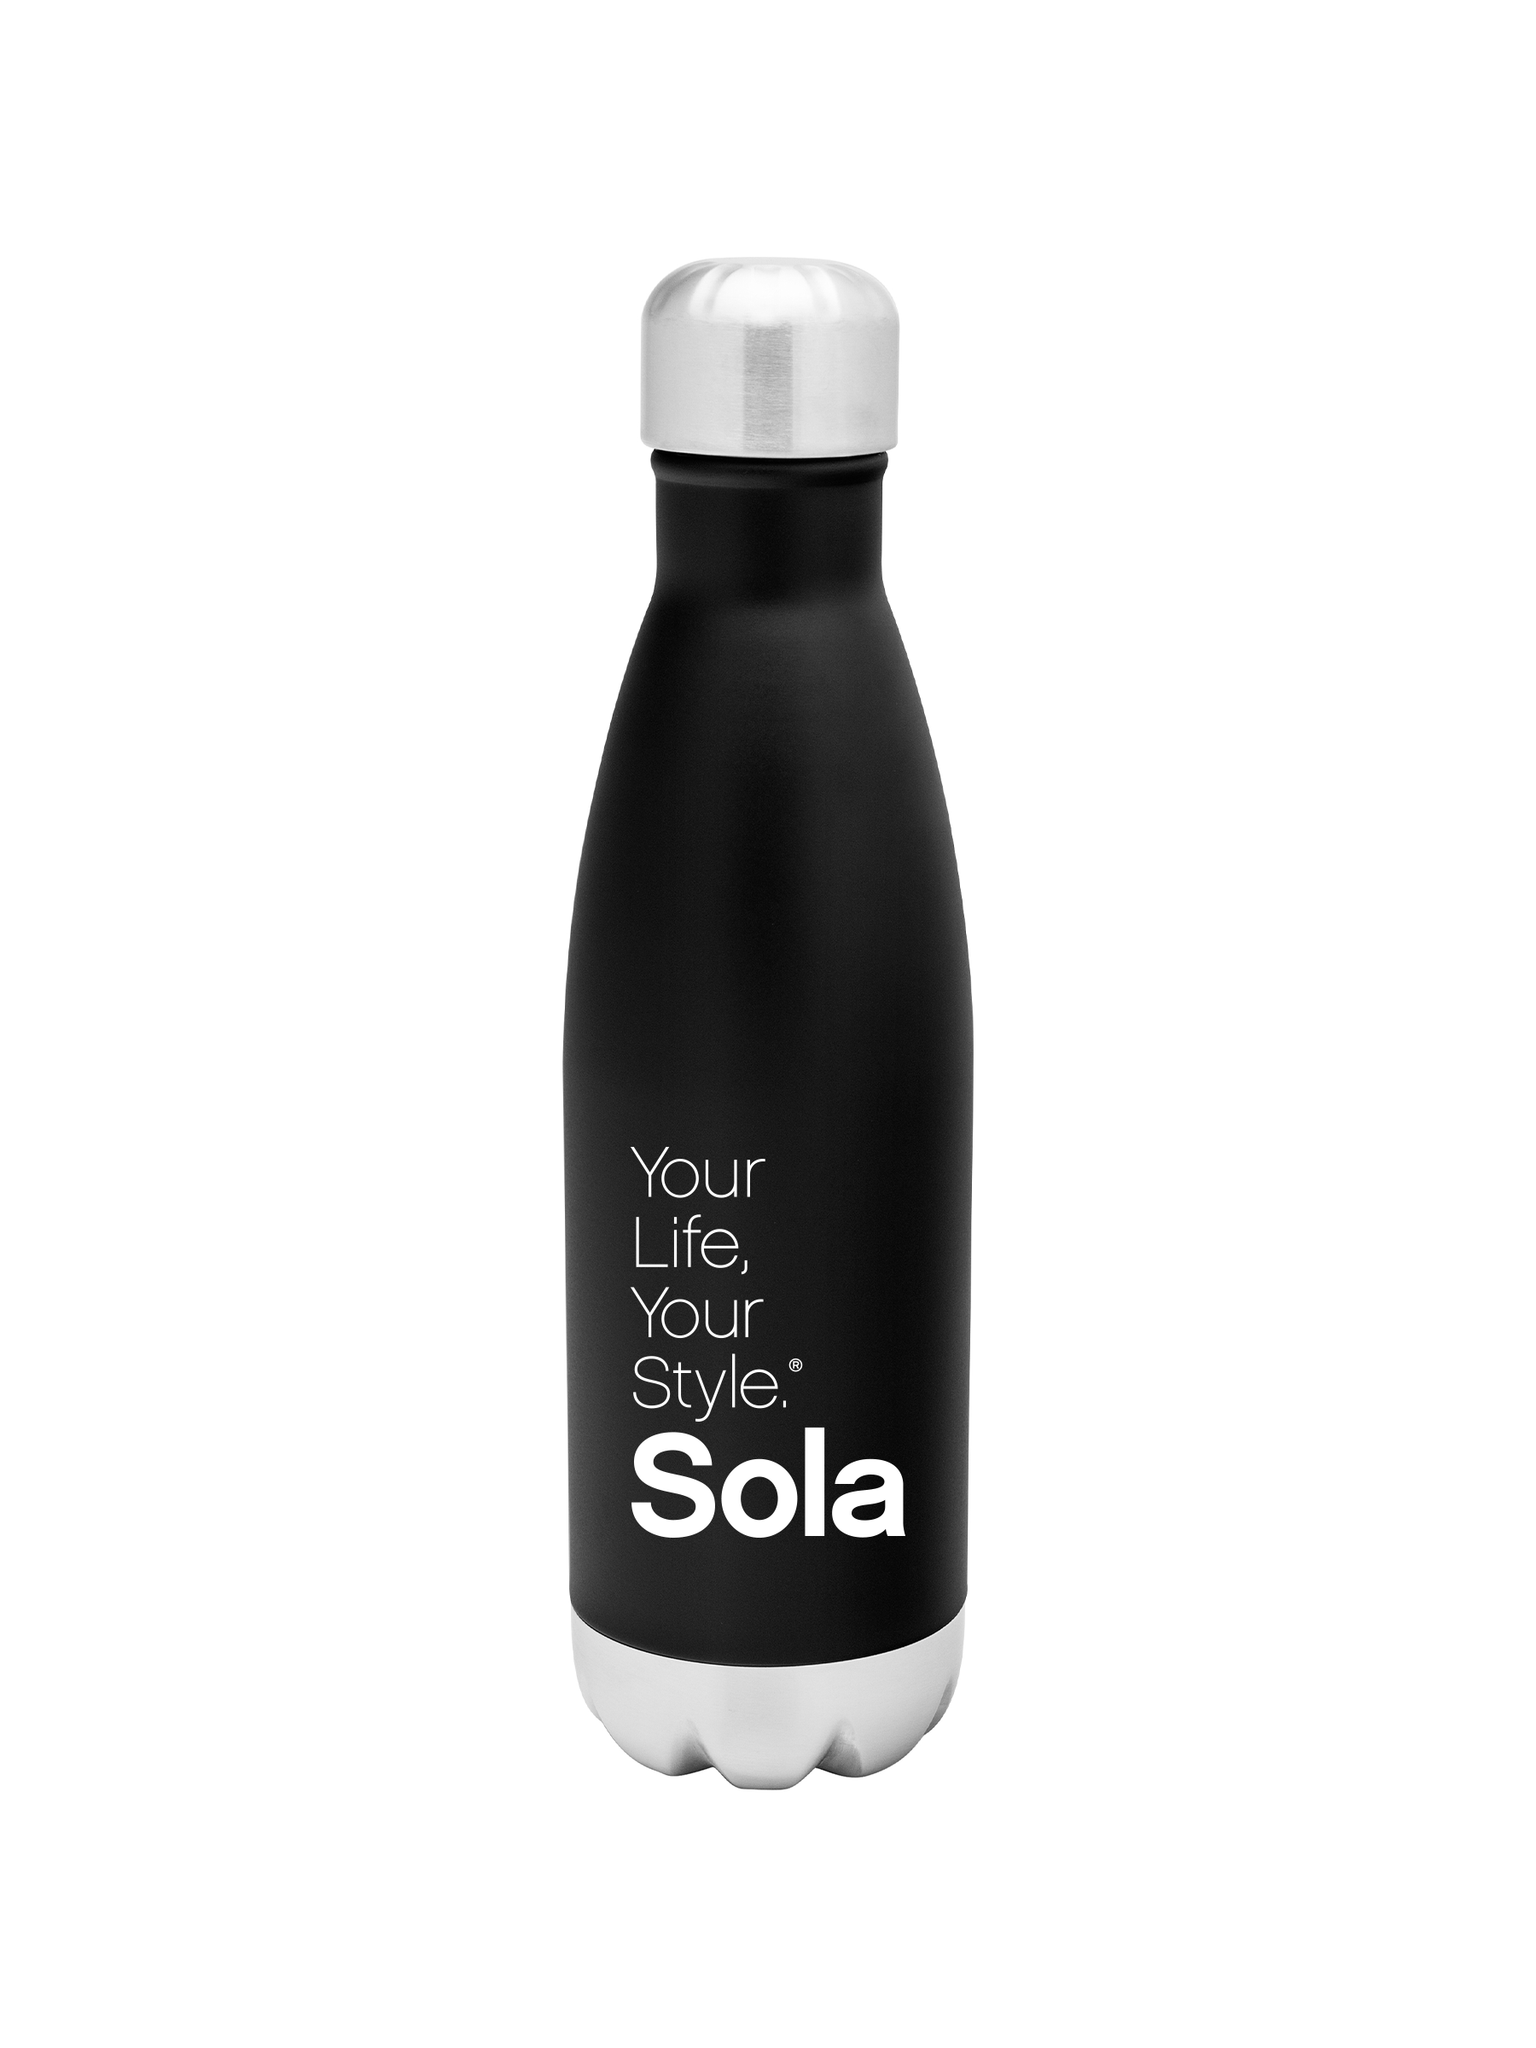 Shop Insulated Water Bottles